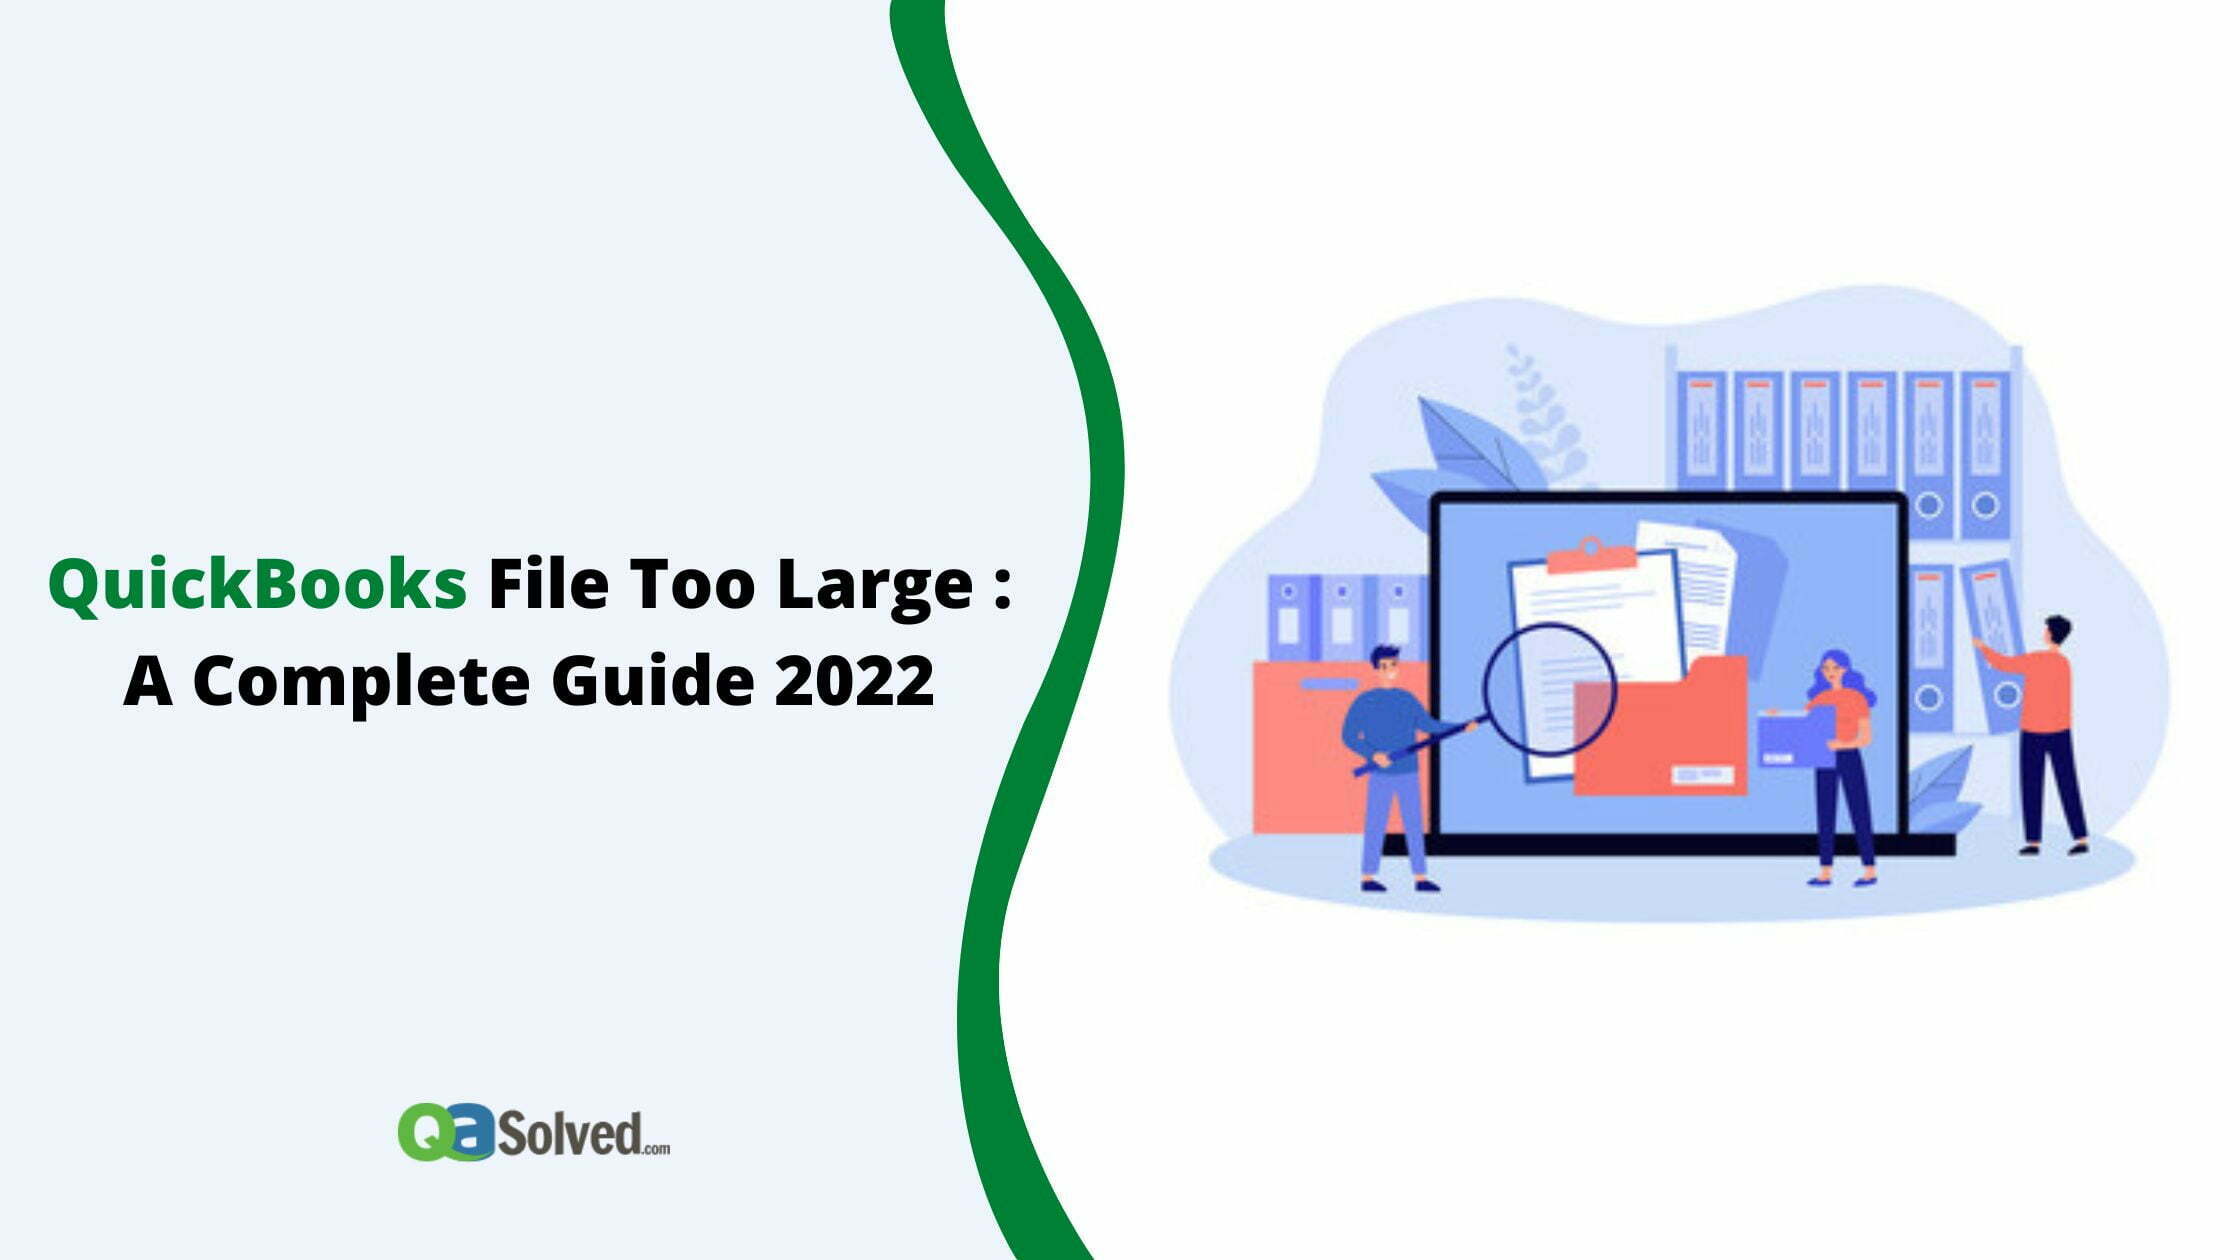 QuickBooks File Too Large in Size & Slow QB : [A Complete Guide 2022]